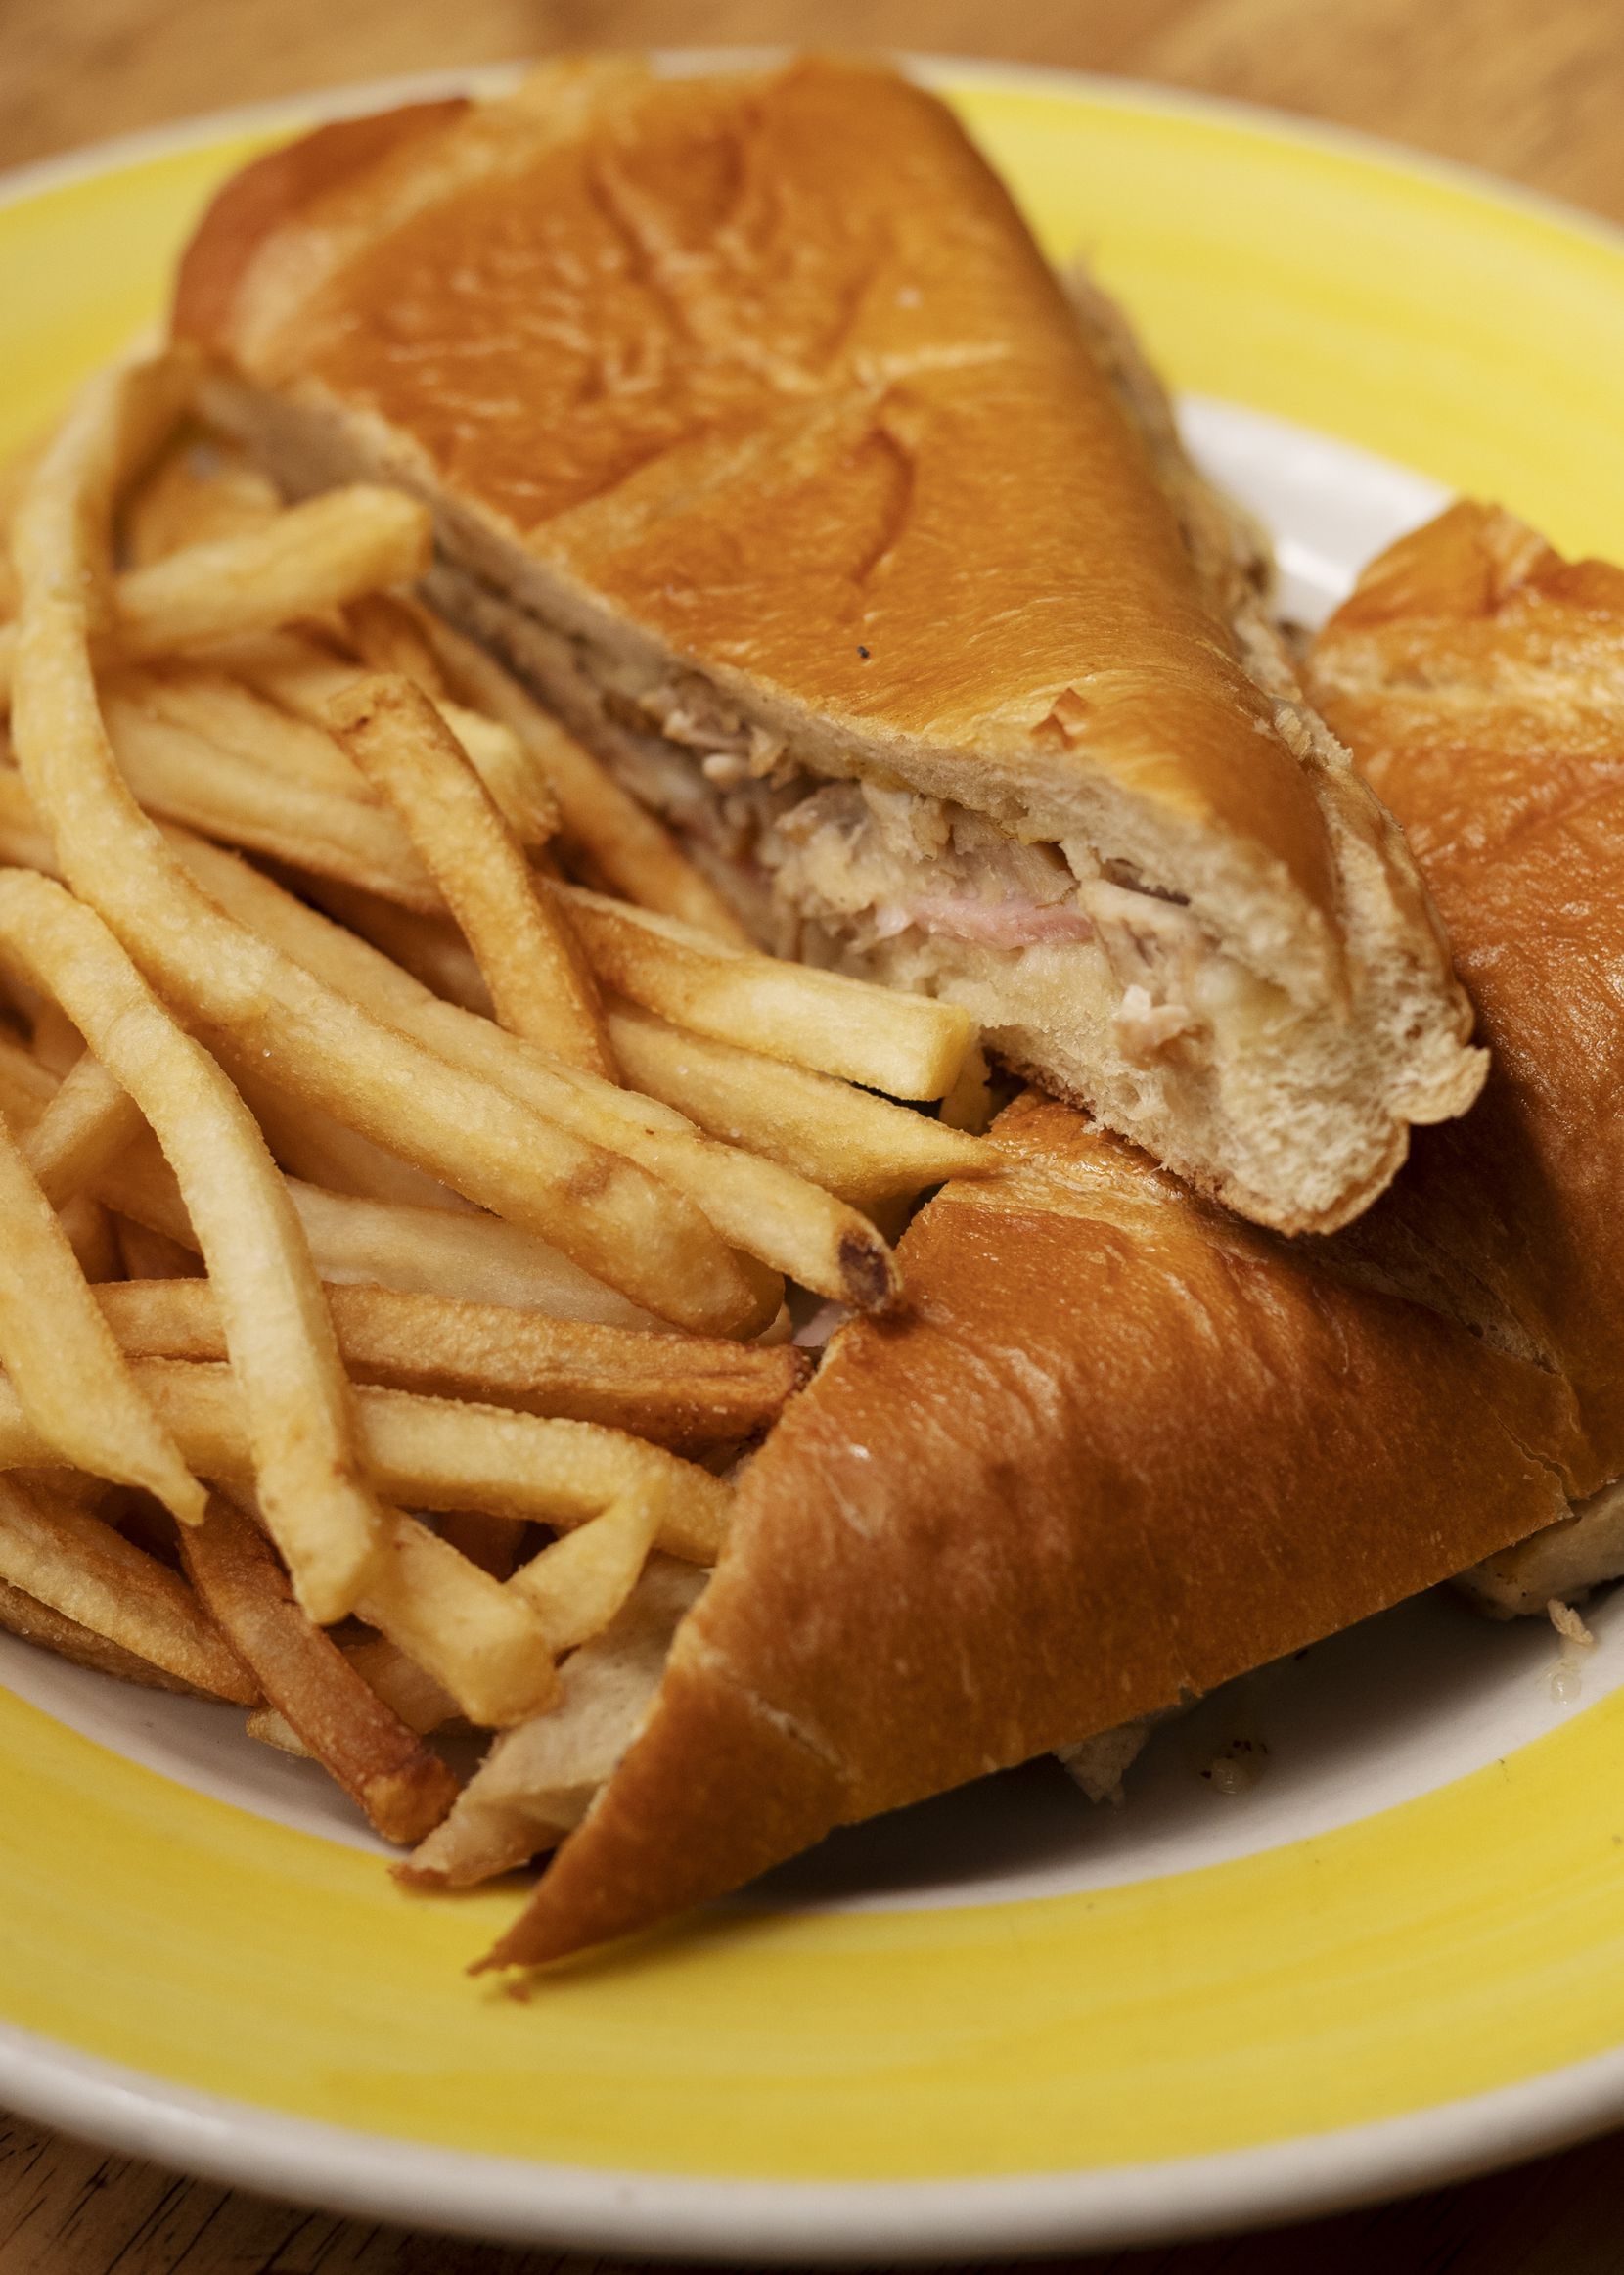 A Cubano sandwich with sliced pork, ham and Swiss cheese, served with fries, from Caribbean...